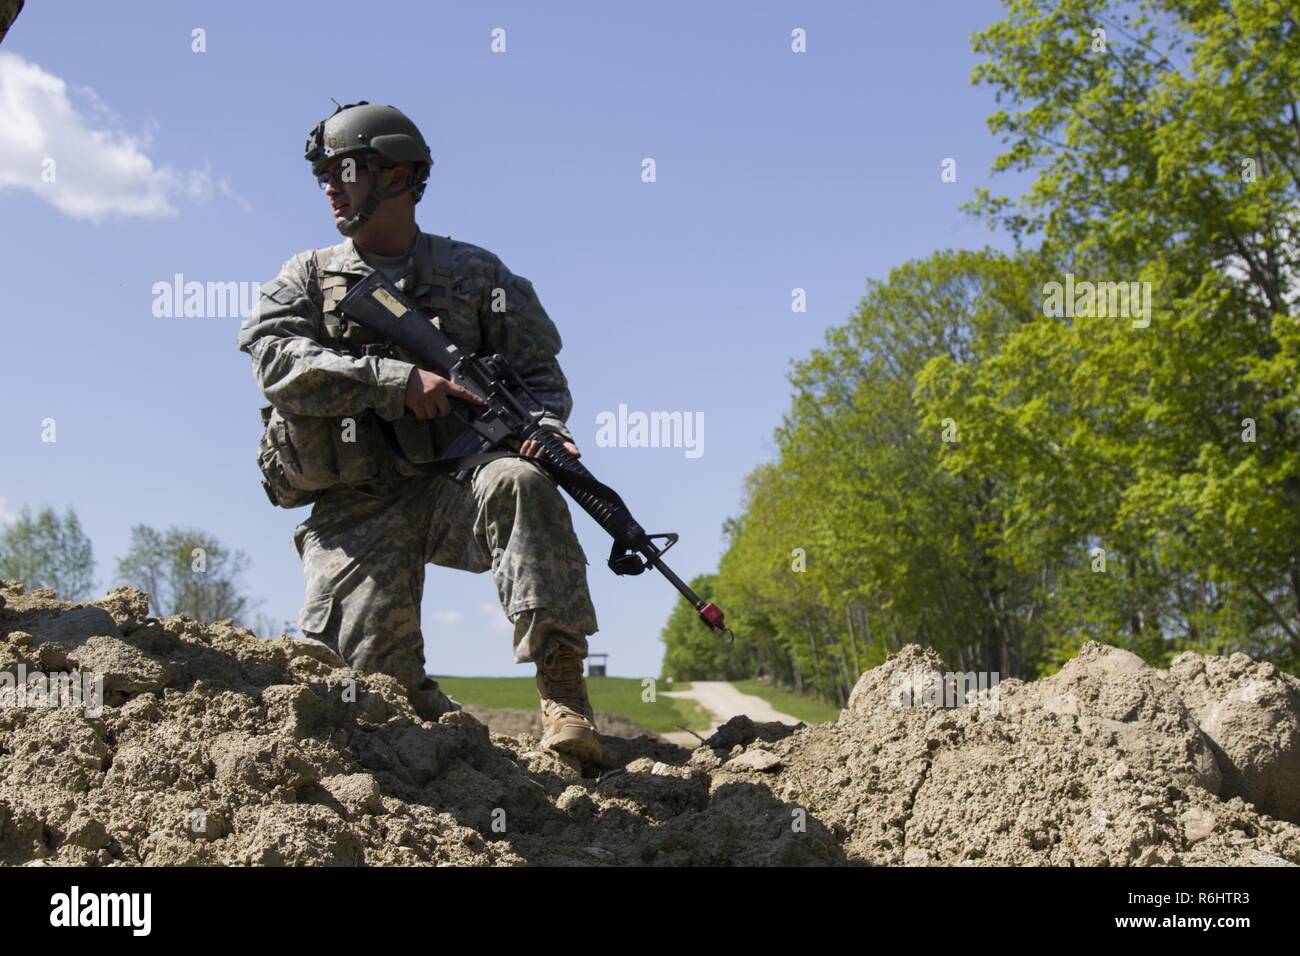 A U.S. Army officer candidate observes soldiers clearing a make-shift bunker during a bunker clearing lane at New Hampshire National Guard Training Site in Center Strafford, Nh., May 19, 2017. Soldiers from Connecticut, Maine, Massachusetts, New Hampshire, New Jersey, New York, Rhode Island, and Vermont participated in the Officer Candidate School Field Leadership Exercise in preparation for graduation and commission. Stock Photo